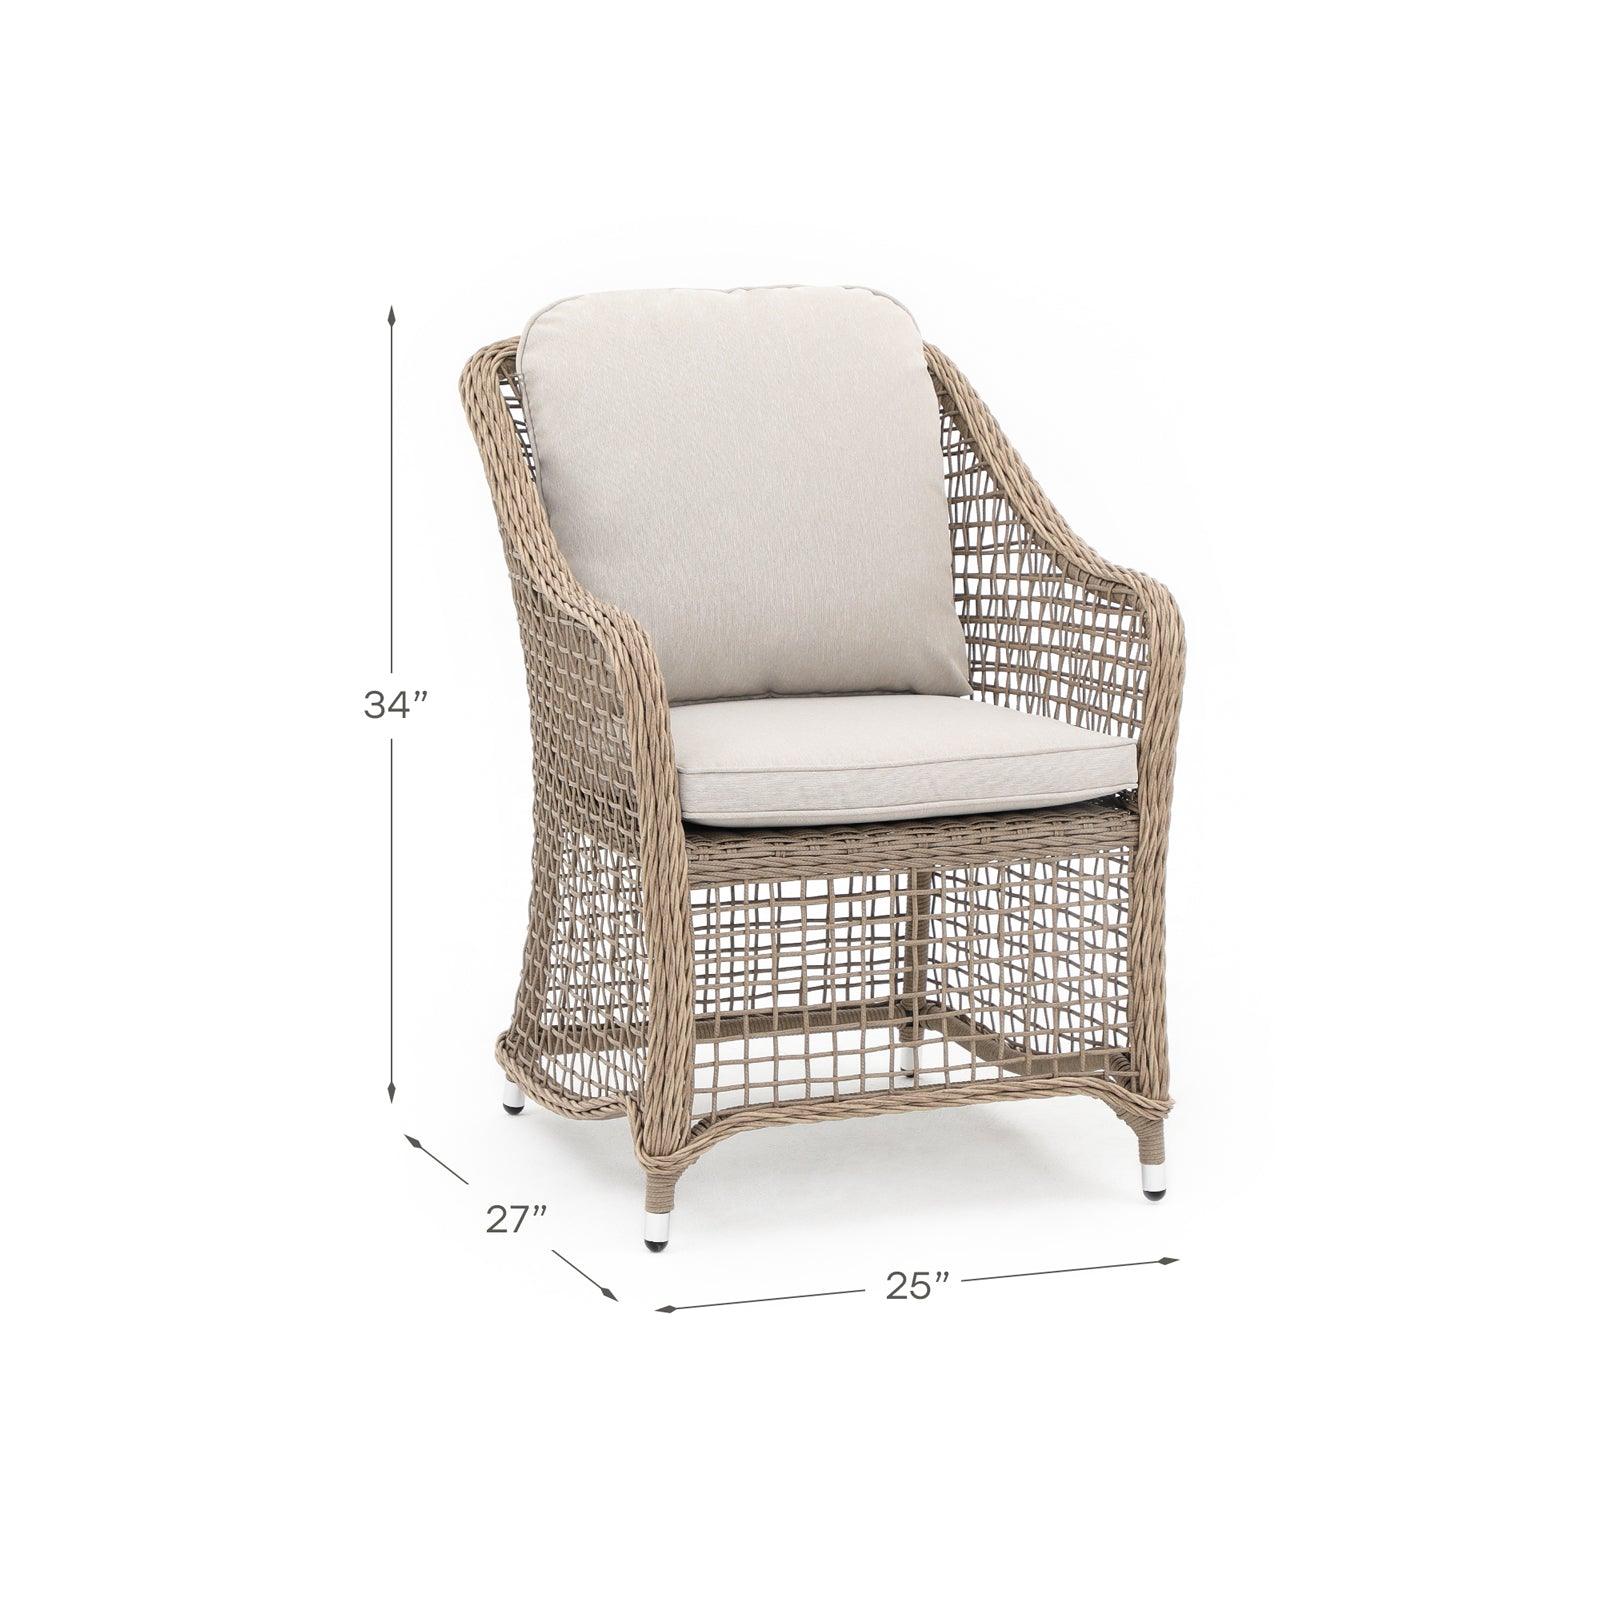 Irati natural color wicker outdoor dining chair with aluminum frame, Creamy-white cushions, Dimension - Jardina Furniture#color_Natural